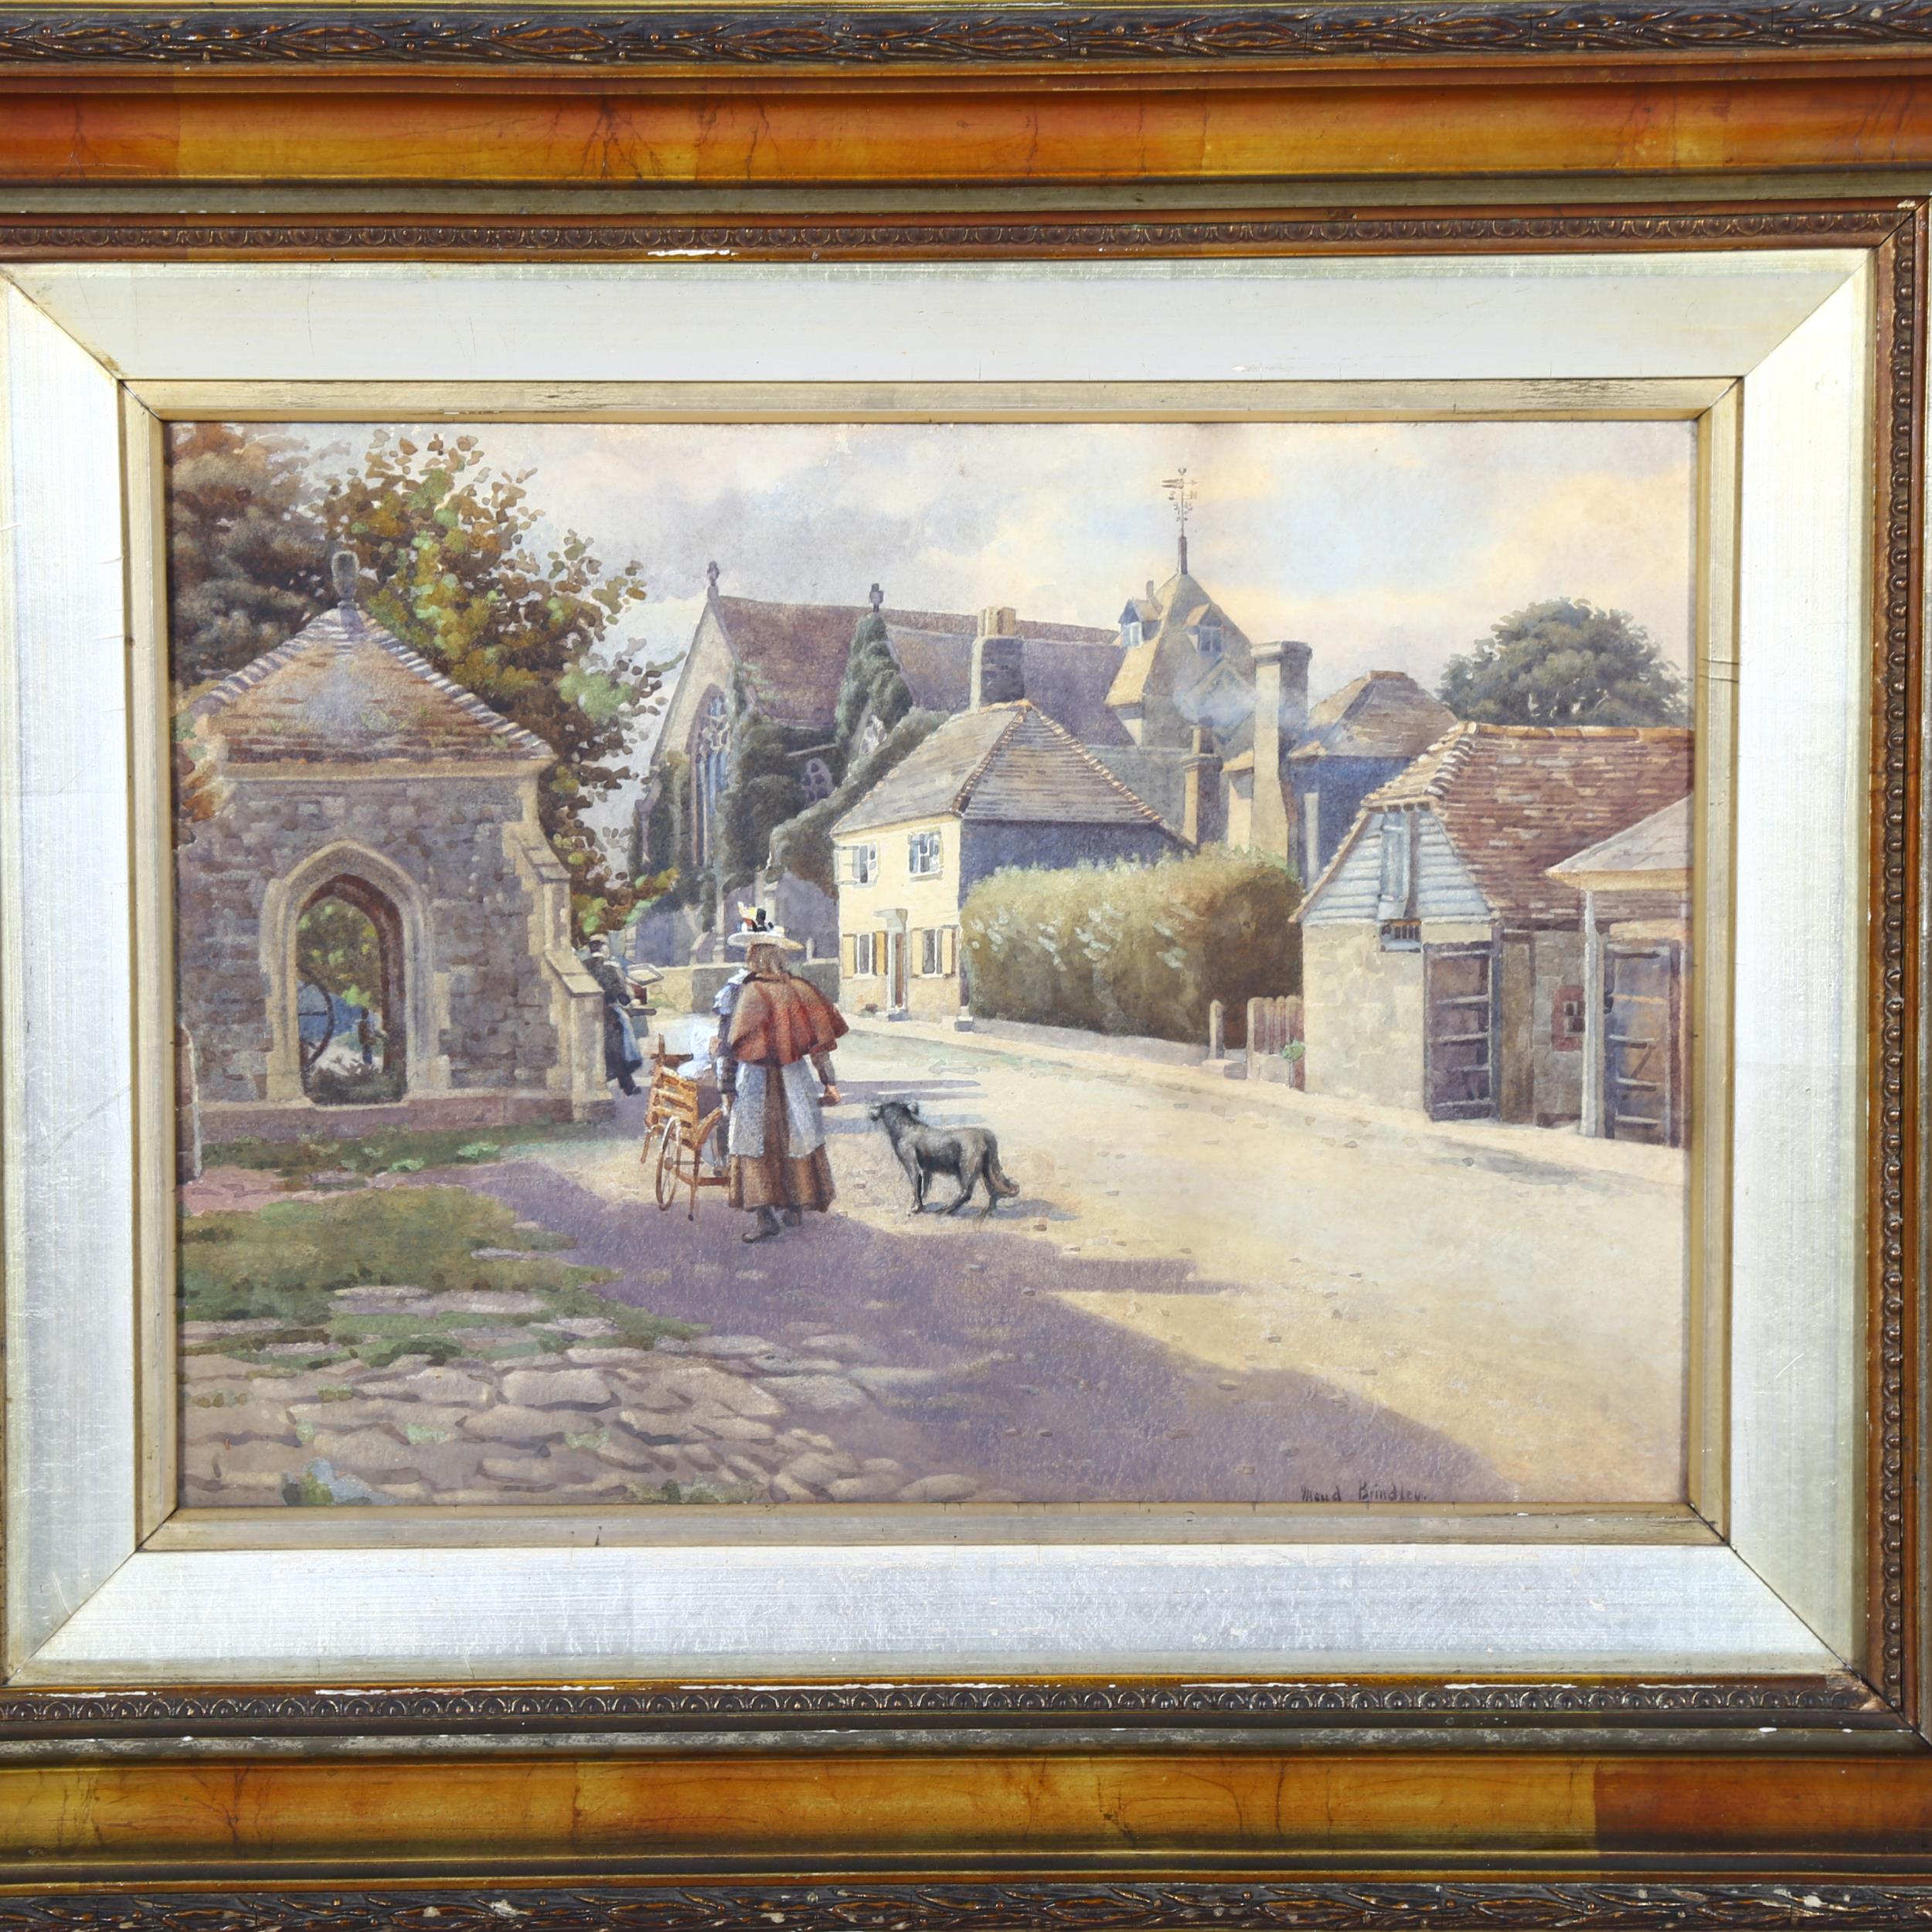 Maude Brindley, Winchelsea street scene, watercolour, signed, image 58cm x 38cm Good condition, very - Image 2 of 5